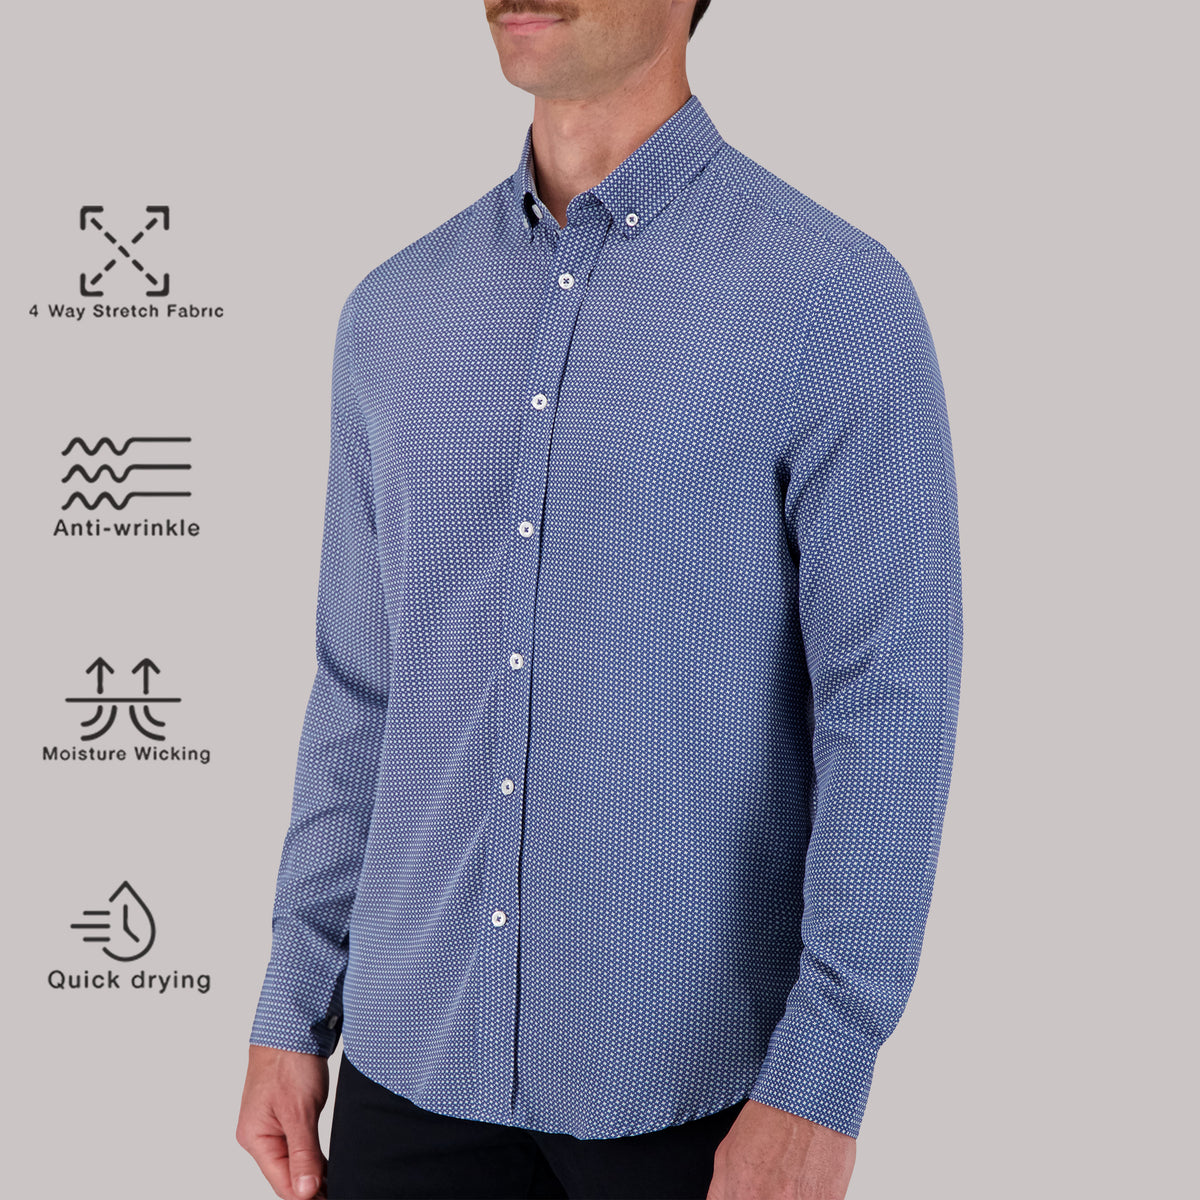 Model Side View of Long Sleeve 4-Way Sport Shirt with Geometric Print in Cobalt with description of material being 4 way stretch fabric, anti-wrinkle, moisture wicking and quick drying